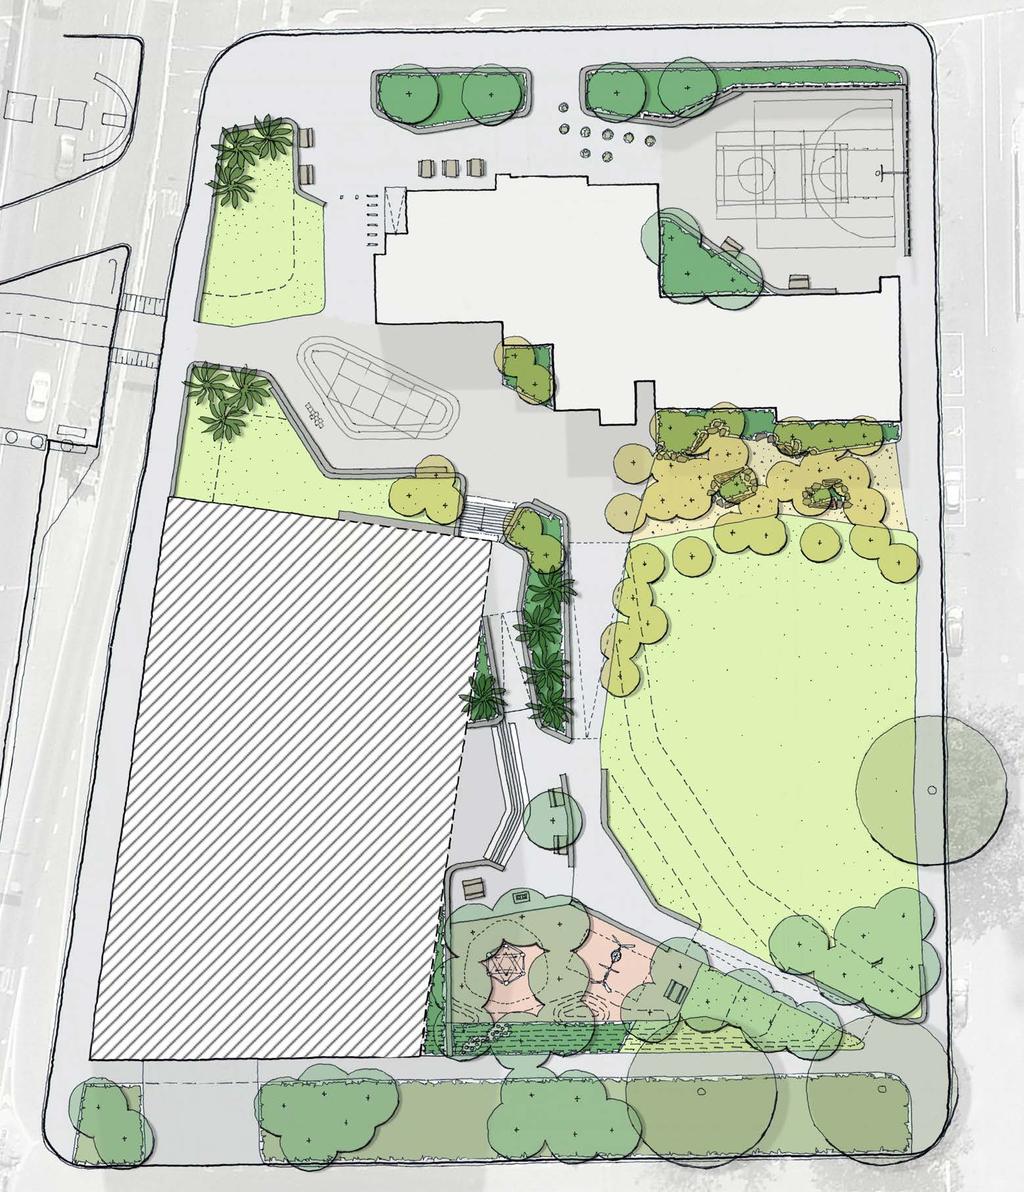 draft concept plan CITY ROAD NORTH LAWN MULTIPURPOSE COURT BOYD COMMUNITY HUB SCHOOLYARD KINGS WAY FOREST